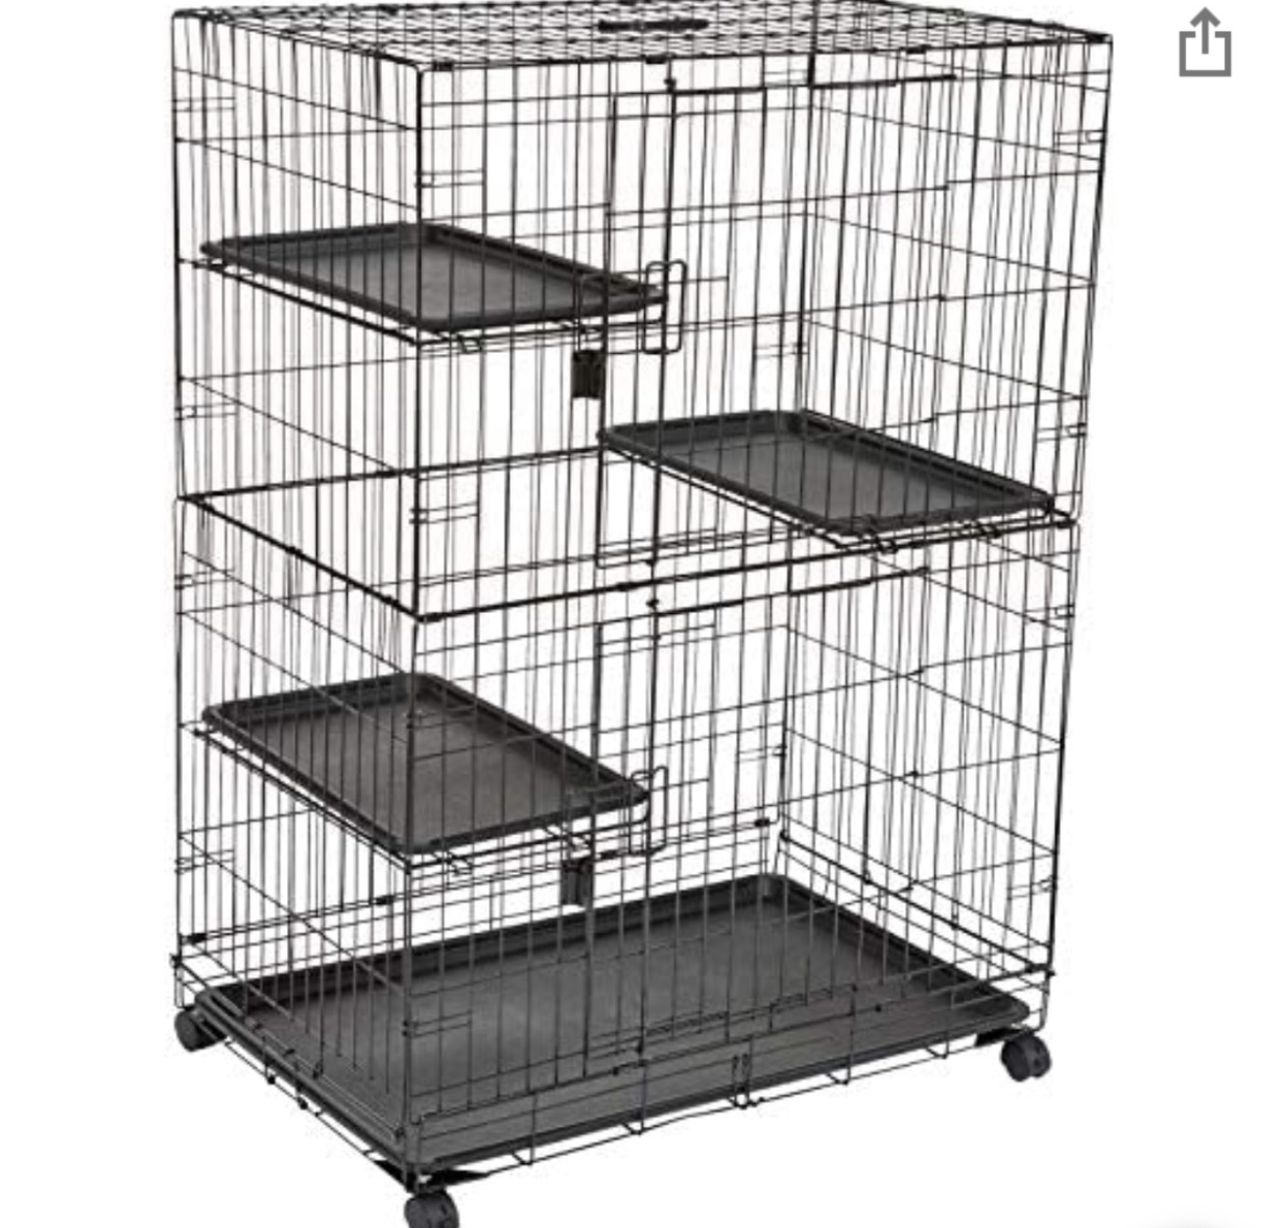 Large 3-Tier Cat Cage Playpen Box Crate Kennel - 36 x 22 x 51 Inches, Black.